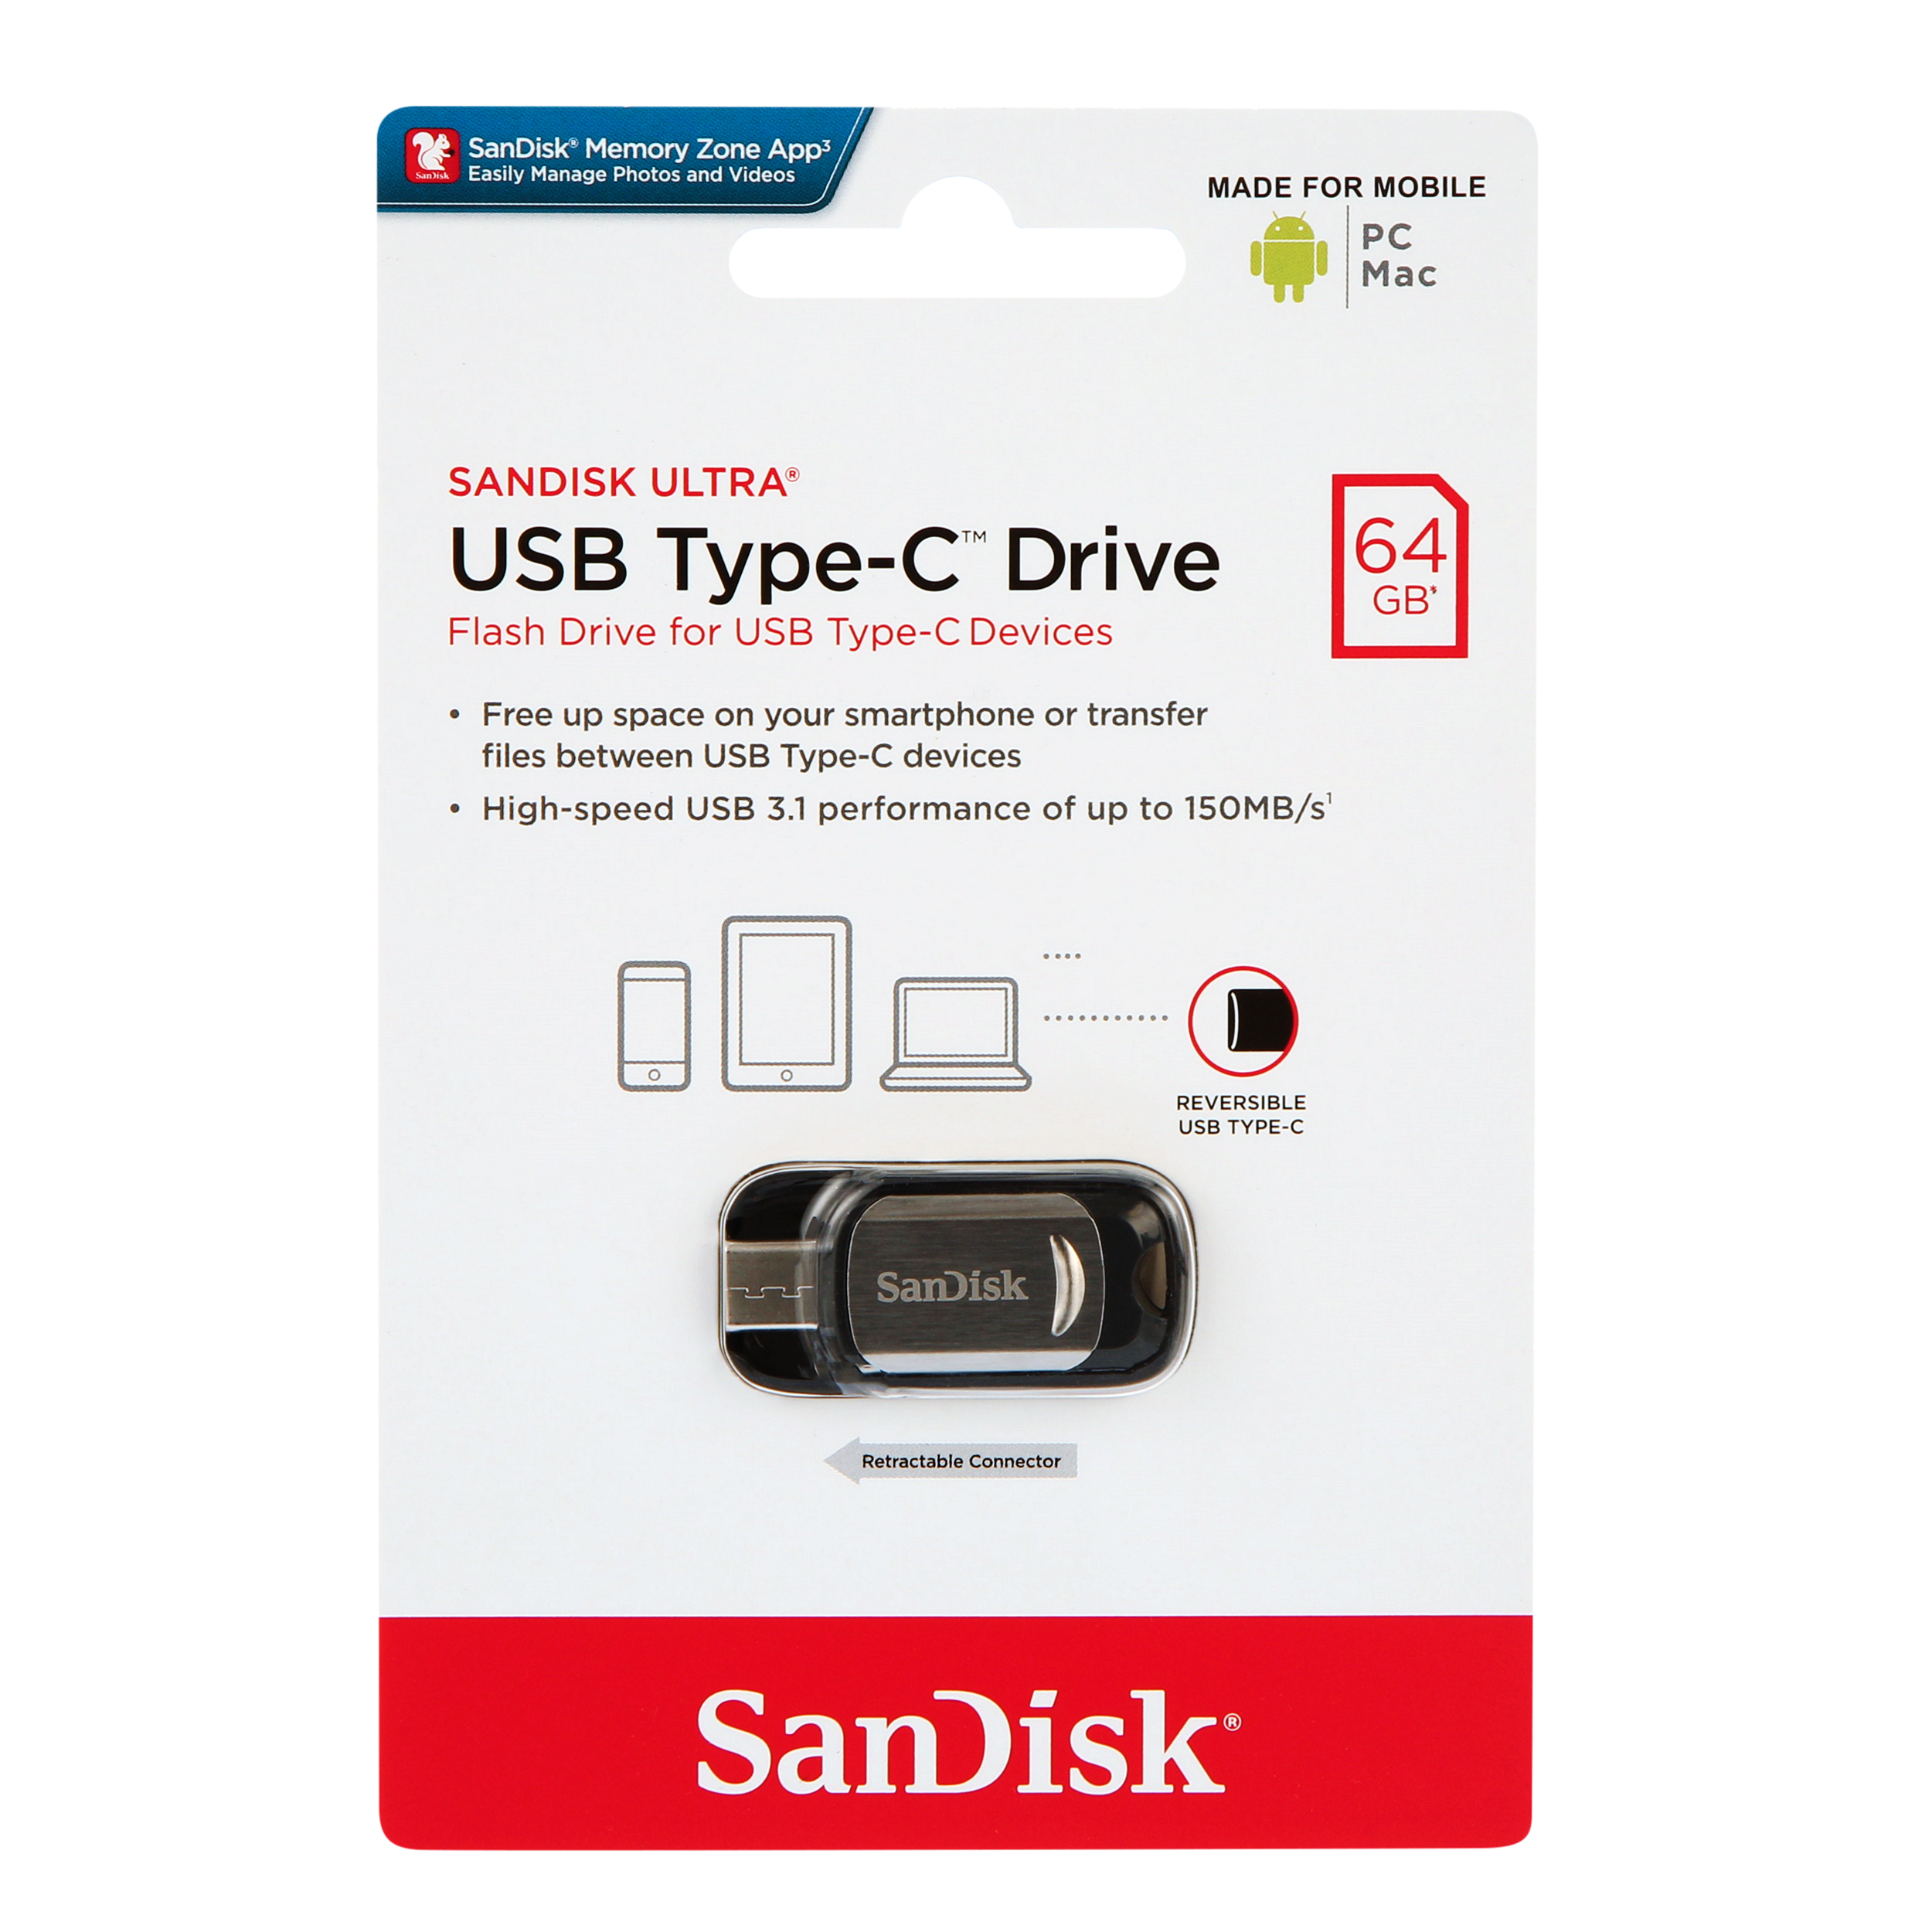 SanDisk Ultra USB Type-C 64GB Flash Drive (SDCZ450-064G-G46) - image 1 of 5